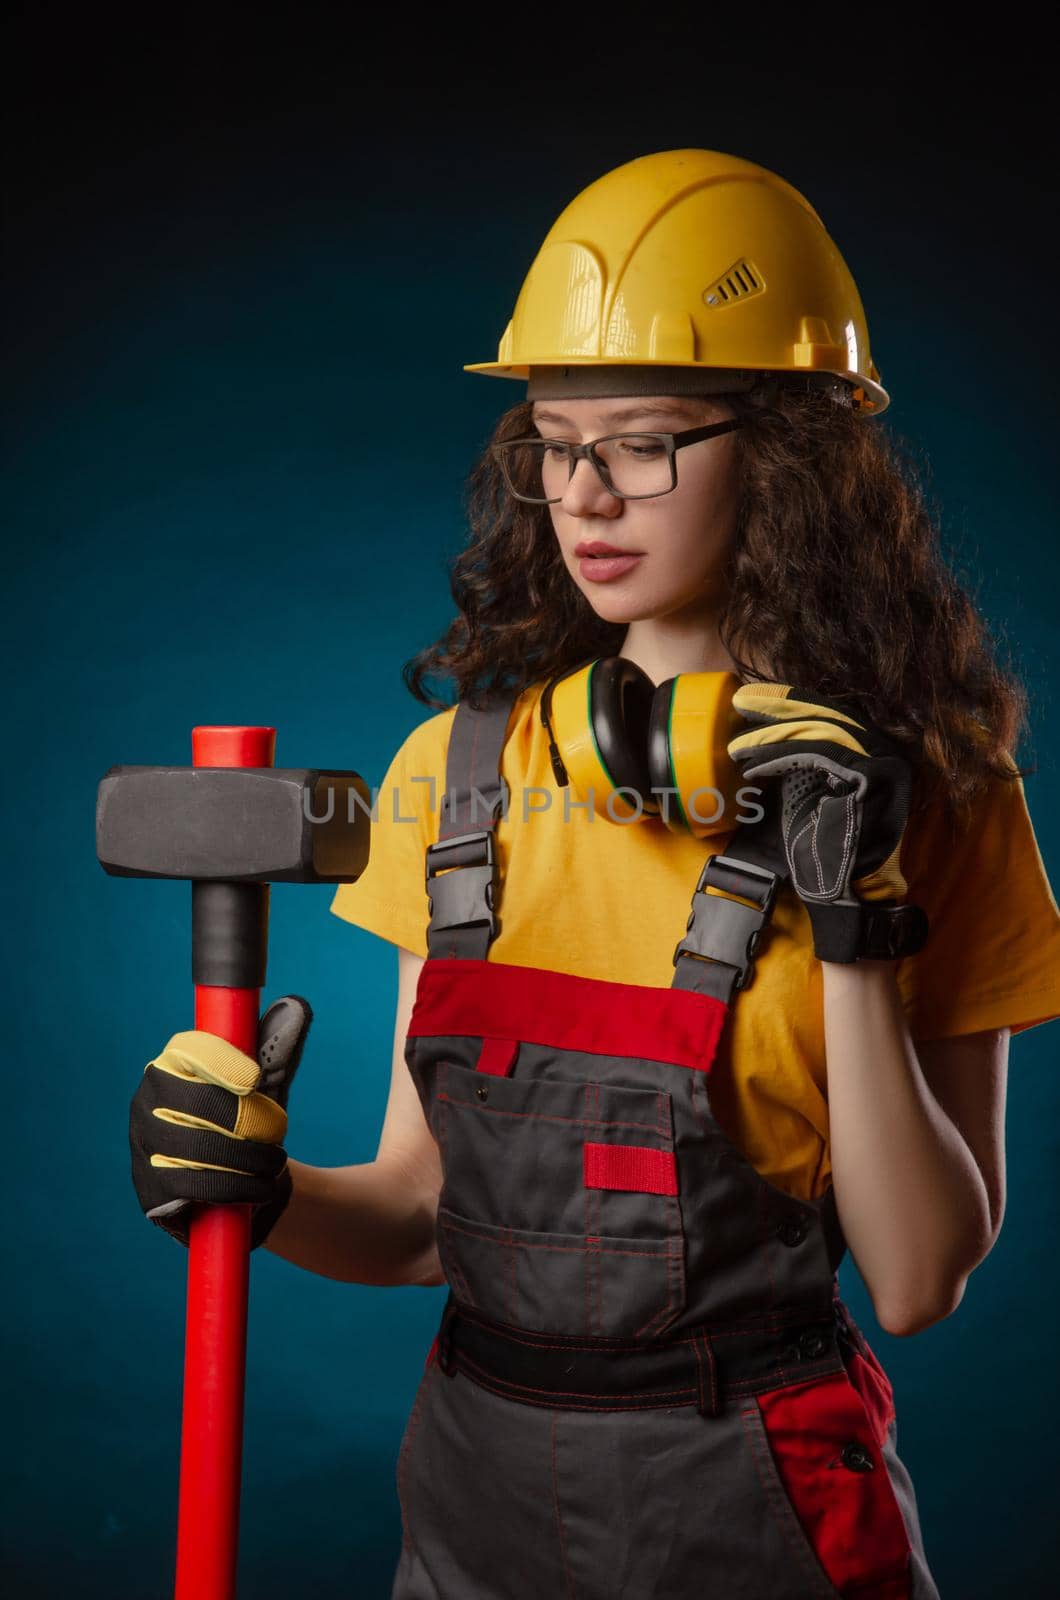 the girl in the construction helmet and overalls with a sledgehammer by Rotozey